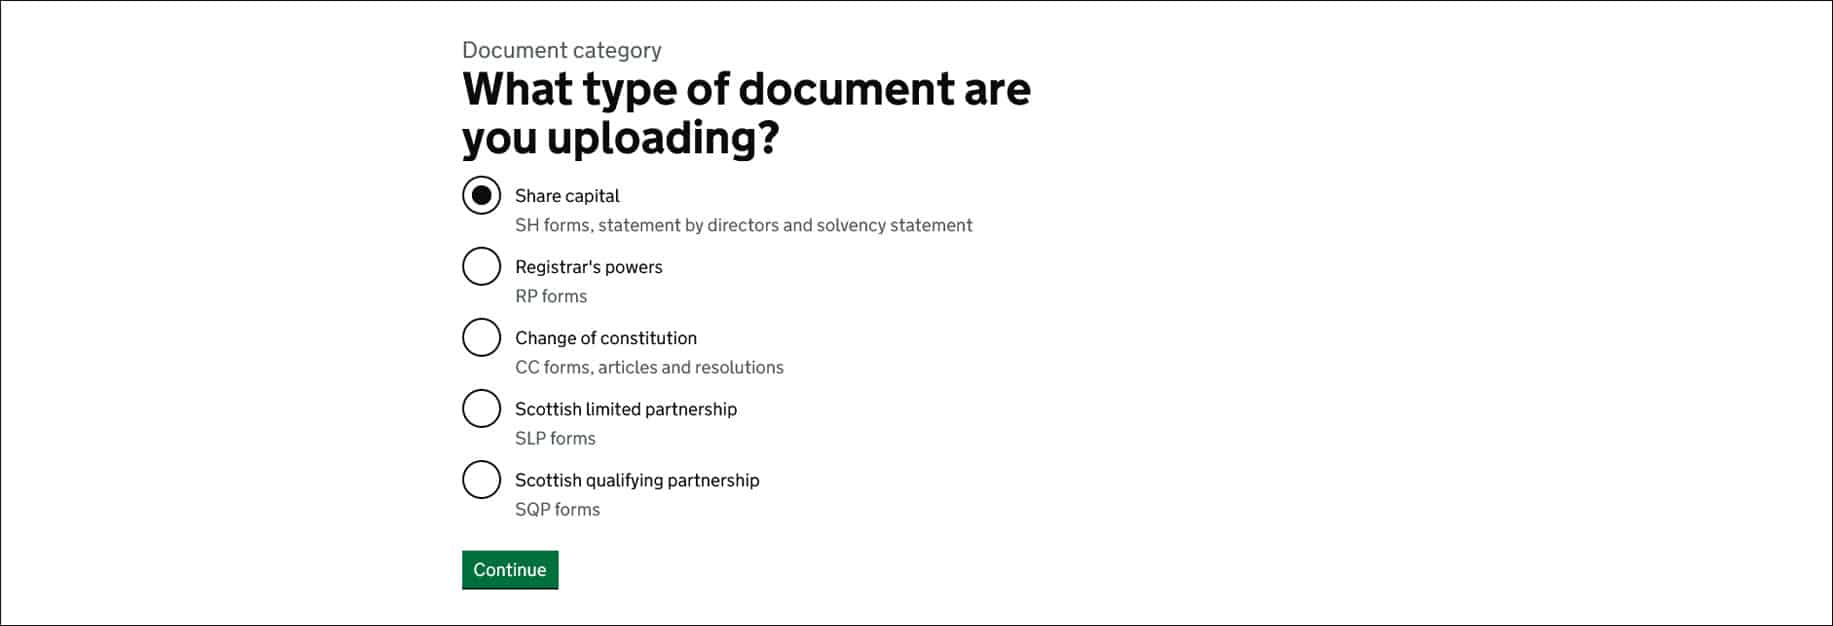 What types of documents are you uploading?